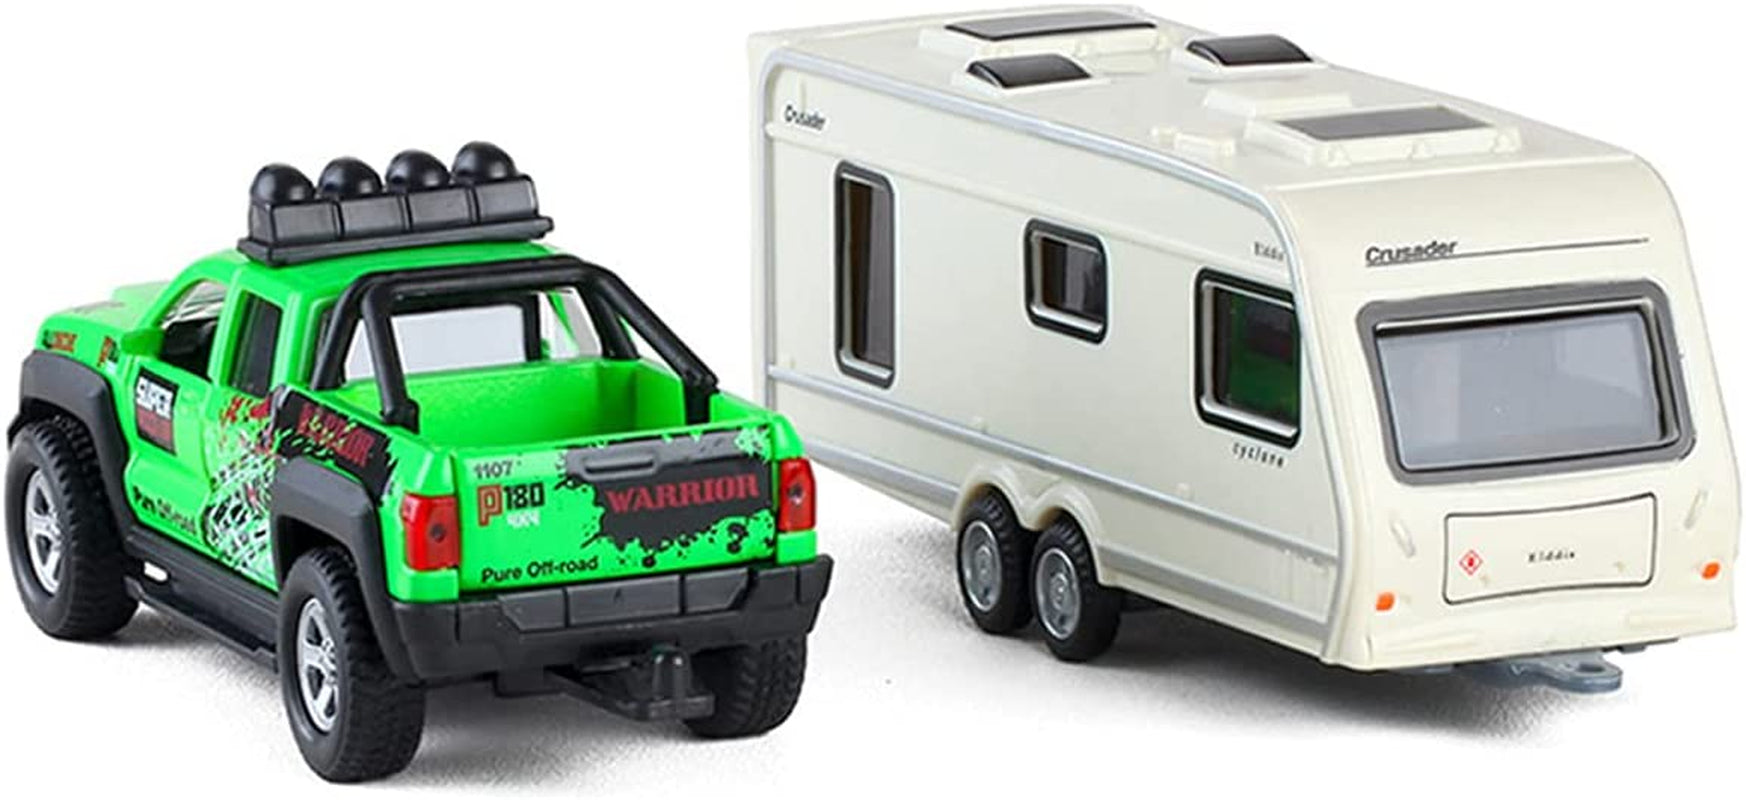 Monster Pickup Truck Trailer with Toy Camper RV Motorhome Toys for Boys Diecast Model Car Metal Toy Cars 1/36 Scale Off-Road SUV Pull Back Friction Powered Doors Open Light Sound Kids Gifts, Green